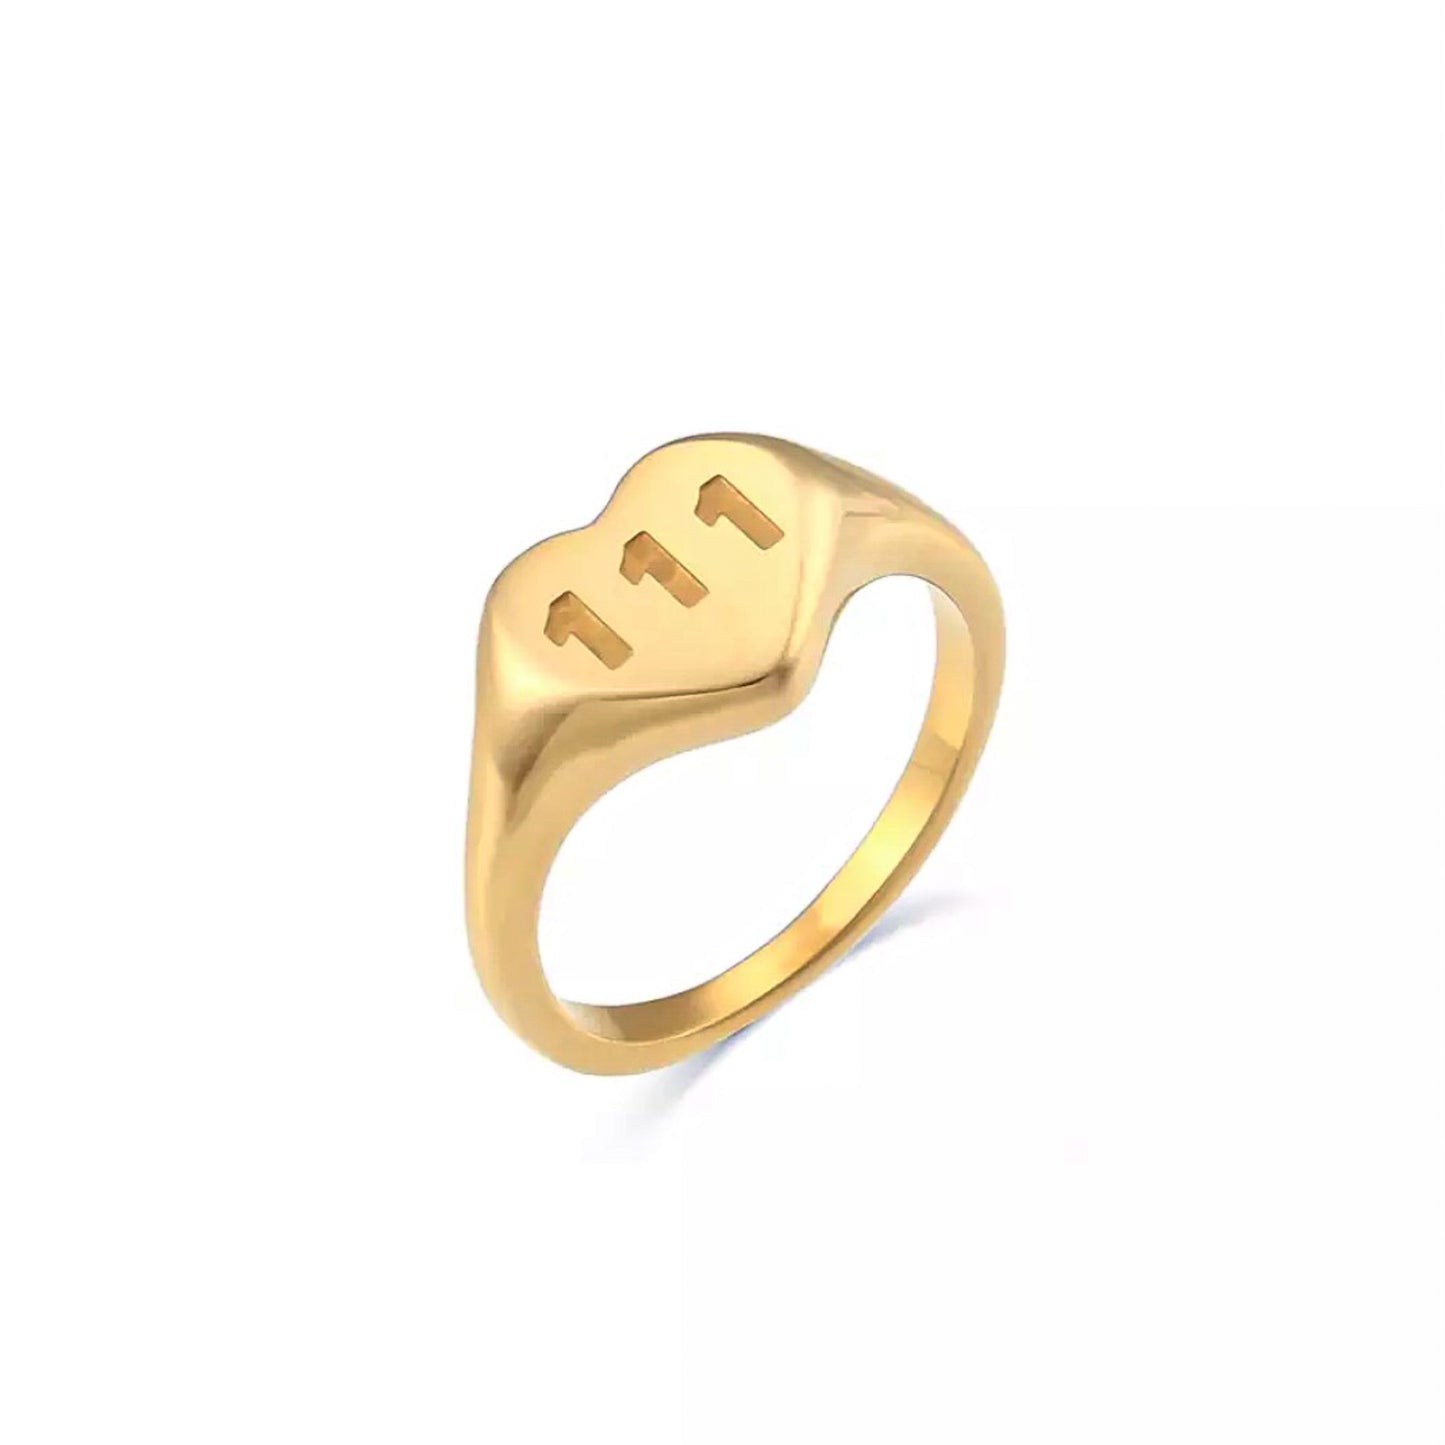 Ange Ring│18k Gold Plated